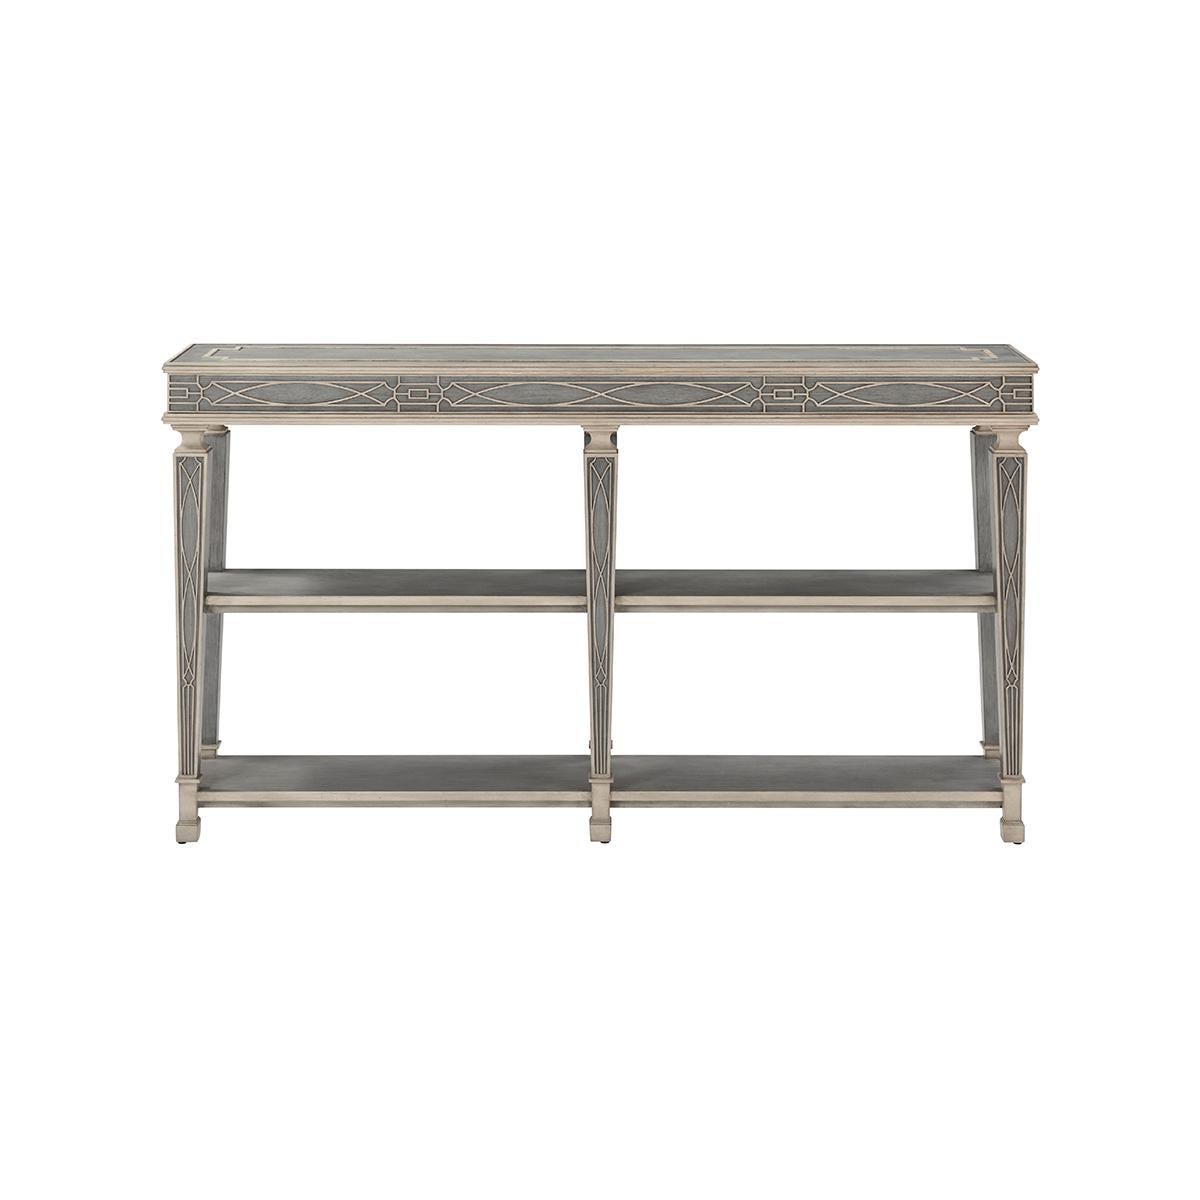 A grey limestone finished console table with fretwork and accented with a molded carving apron and two hidden drawers on each side. Raised on six tapered legs with detailed carved molding, the console table is joined together with two under-tier